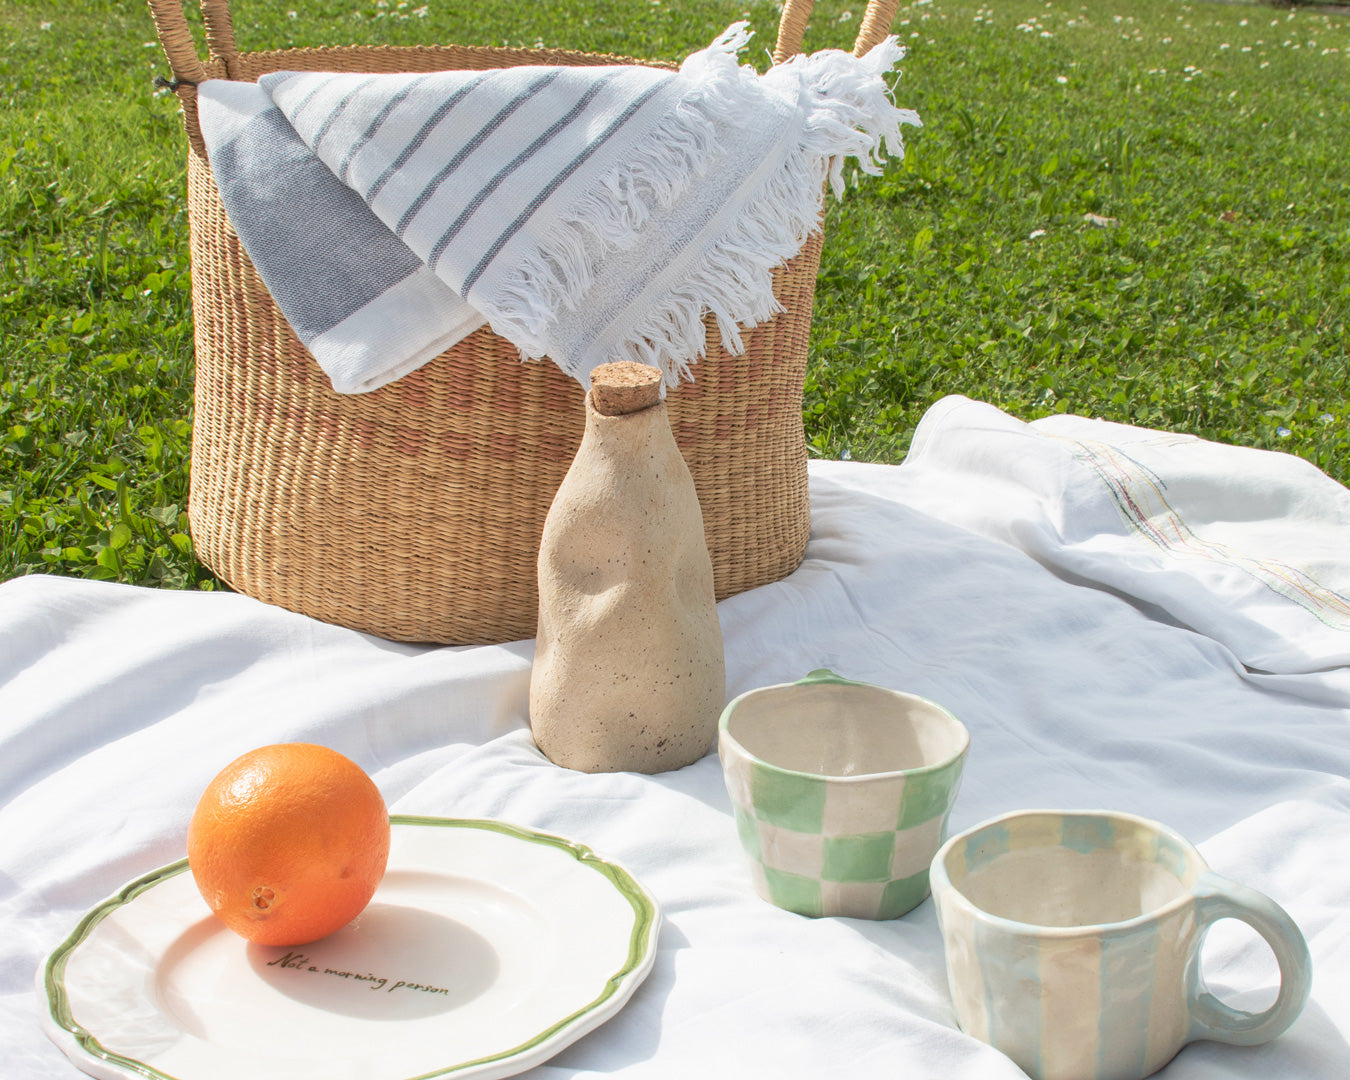 An eco-conscious picnic setup on grass featuring a woven basket with an organic cotton napkin, a biodegradable ceramic jug, and a fresh orange on a sustainably made plate.